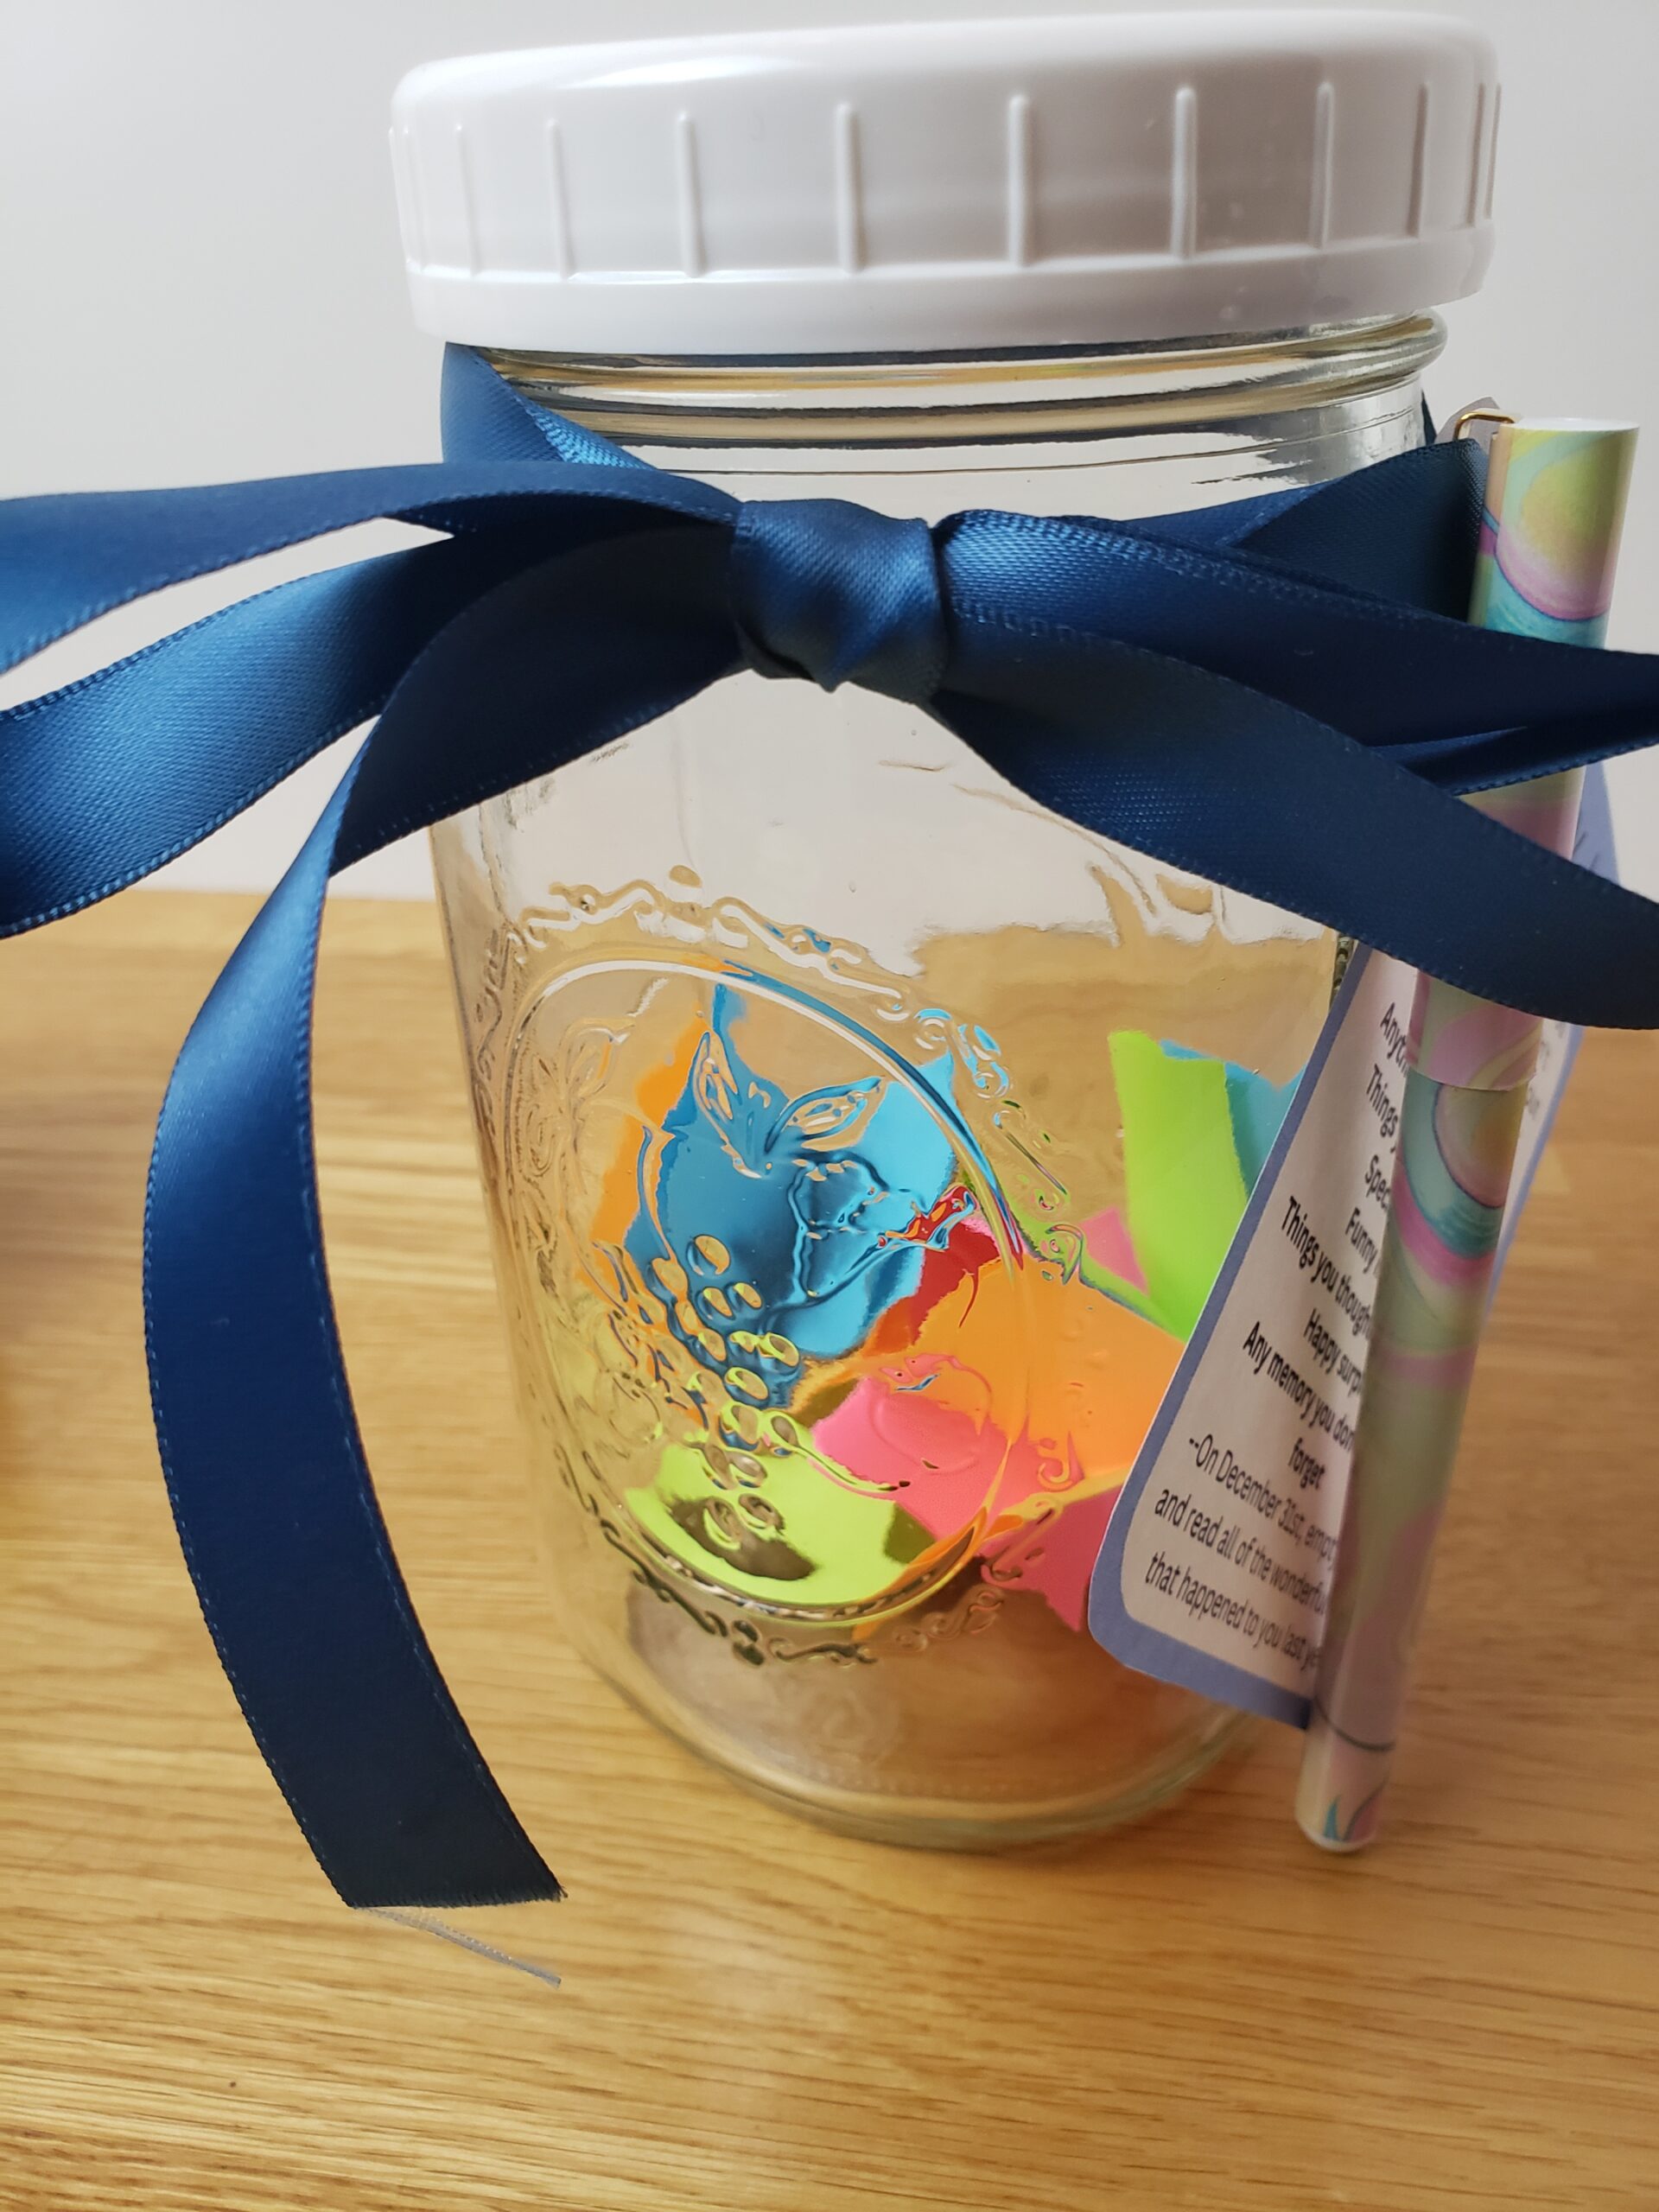 memory jar gift completed with a mason jar